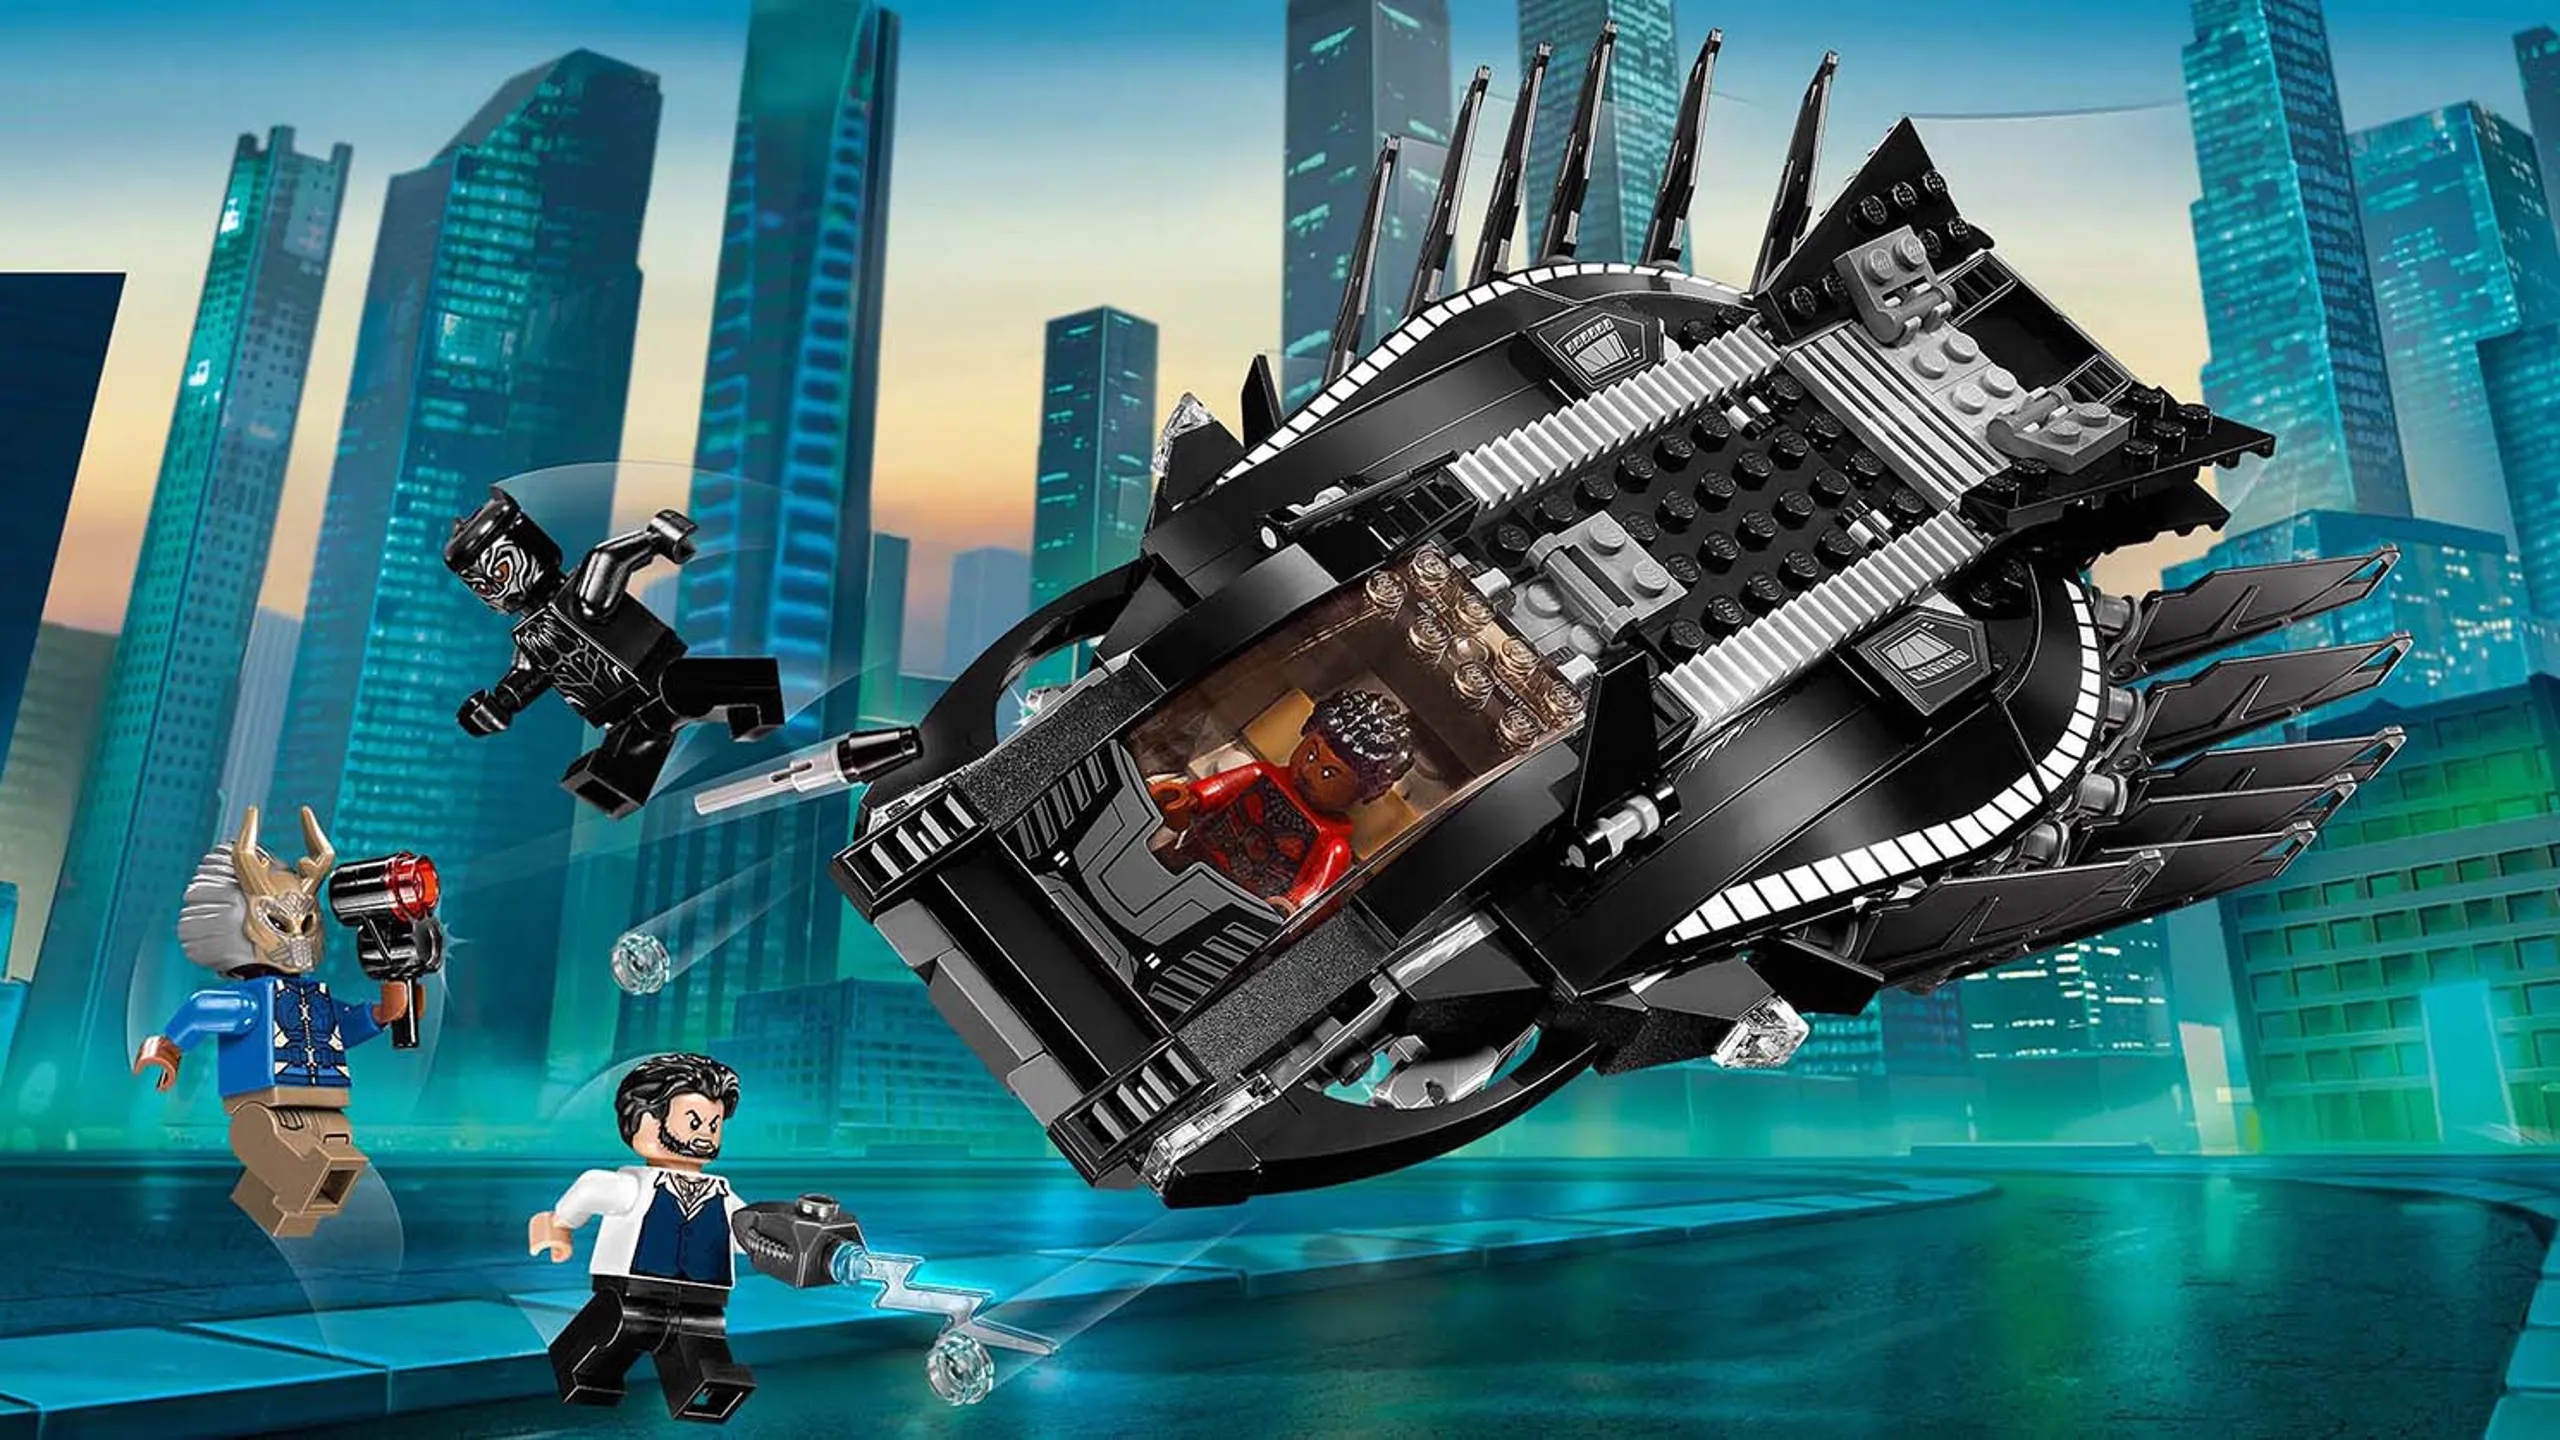 LEGO Super Heroes - 76100 Royal Talon Fighter Attack - Black Panther is in the cockpit of the Royal Talon Fighter with Nakia and fire stud shooters at Killmonger and Ulysses Klaue.